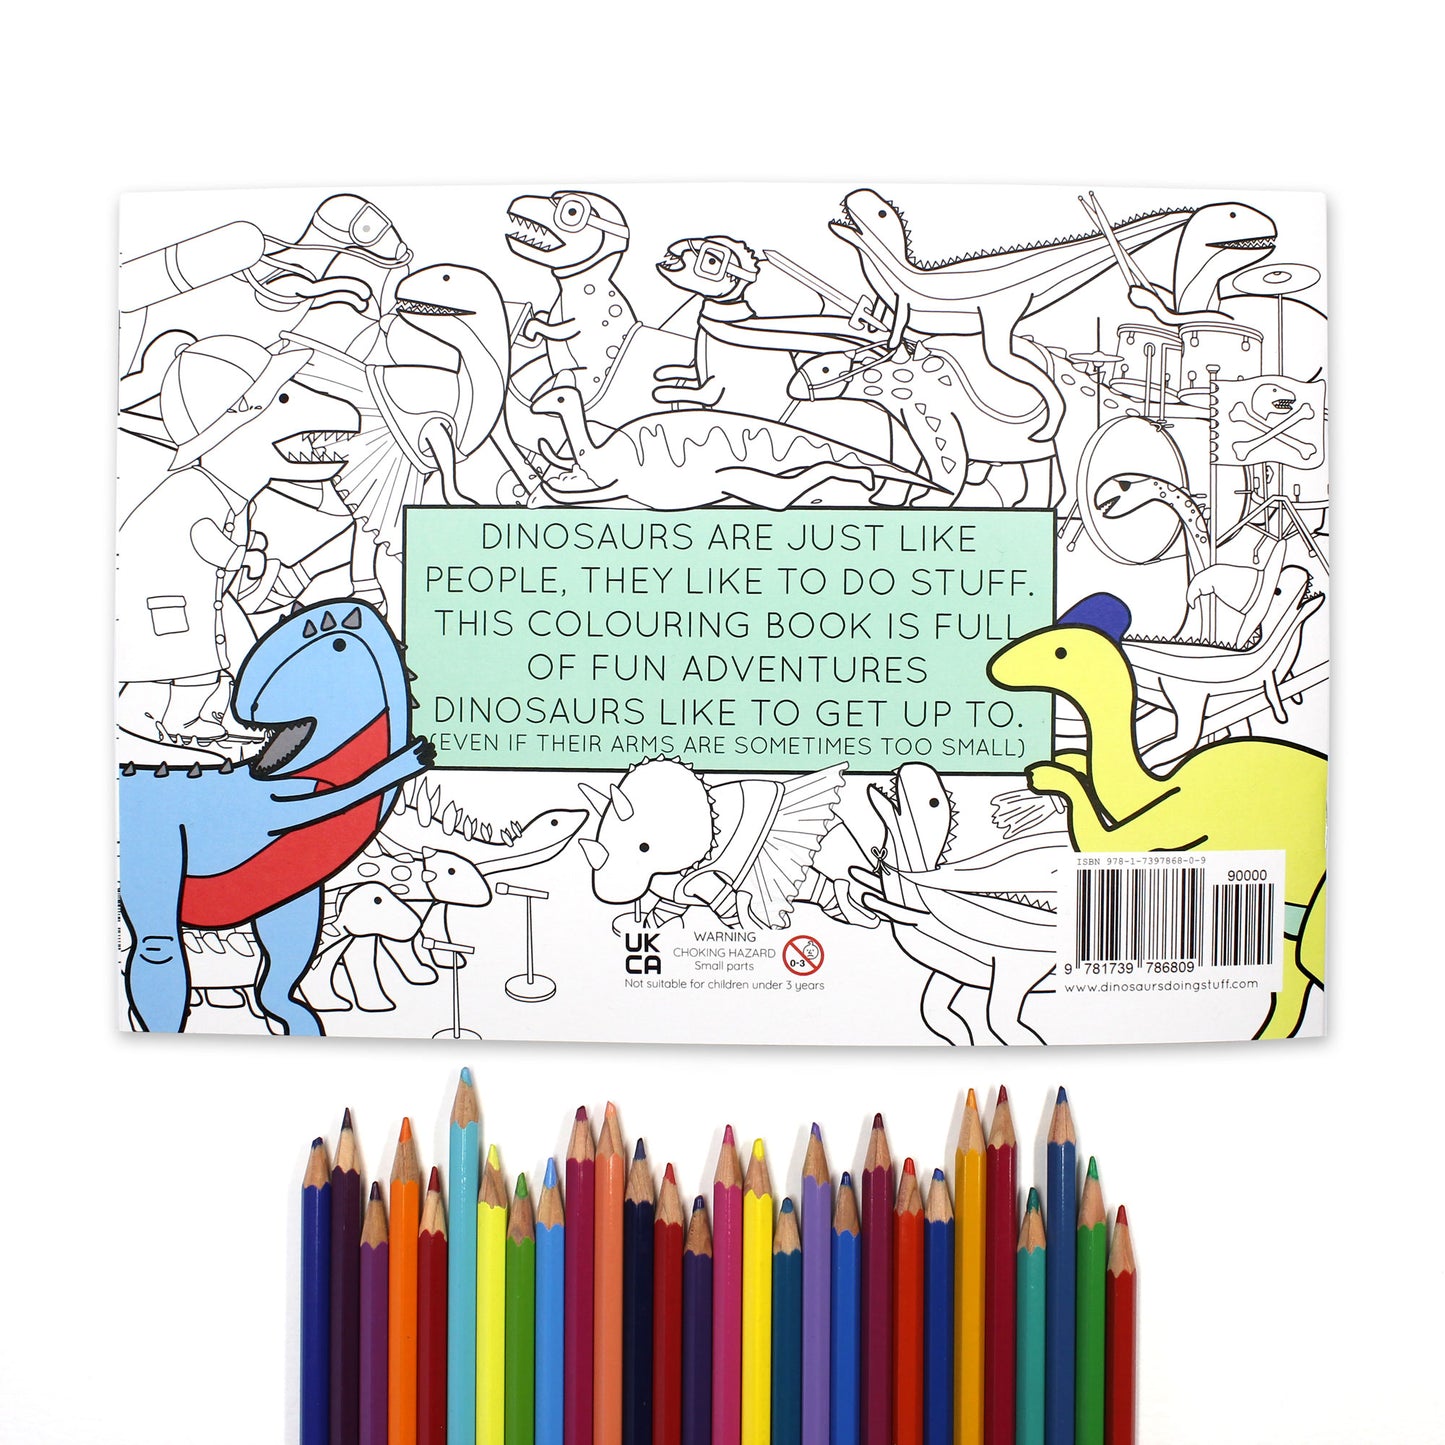 The back cover of Dinosaurs Doing Stuff Colouring Book. There is also a row of brightly coloured pencils below.